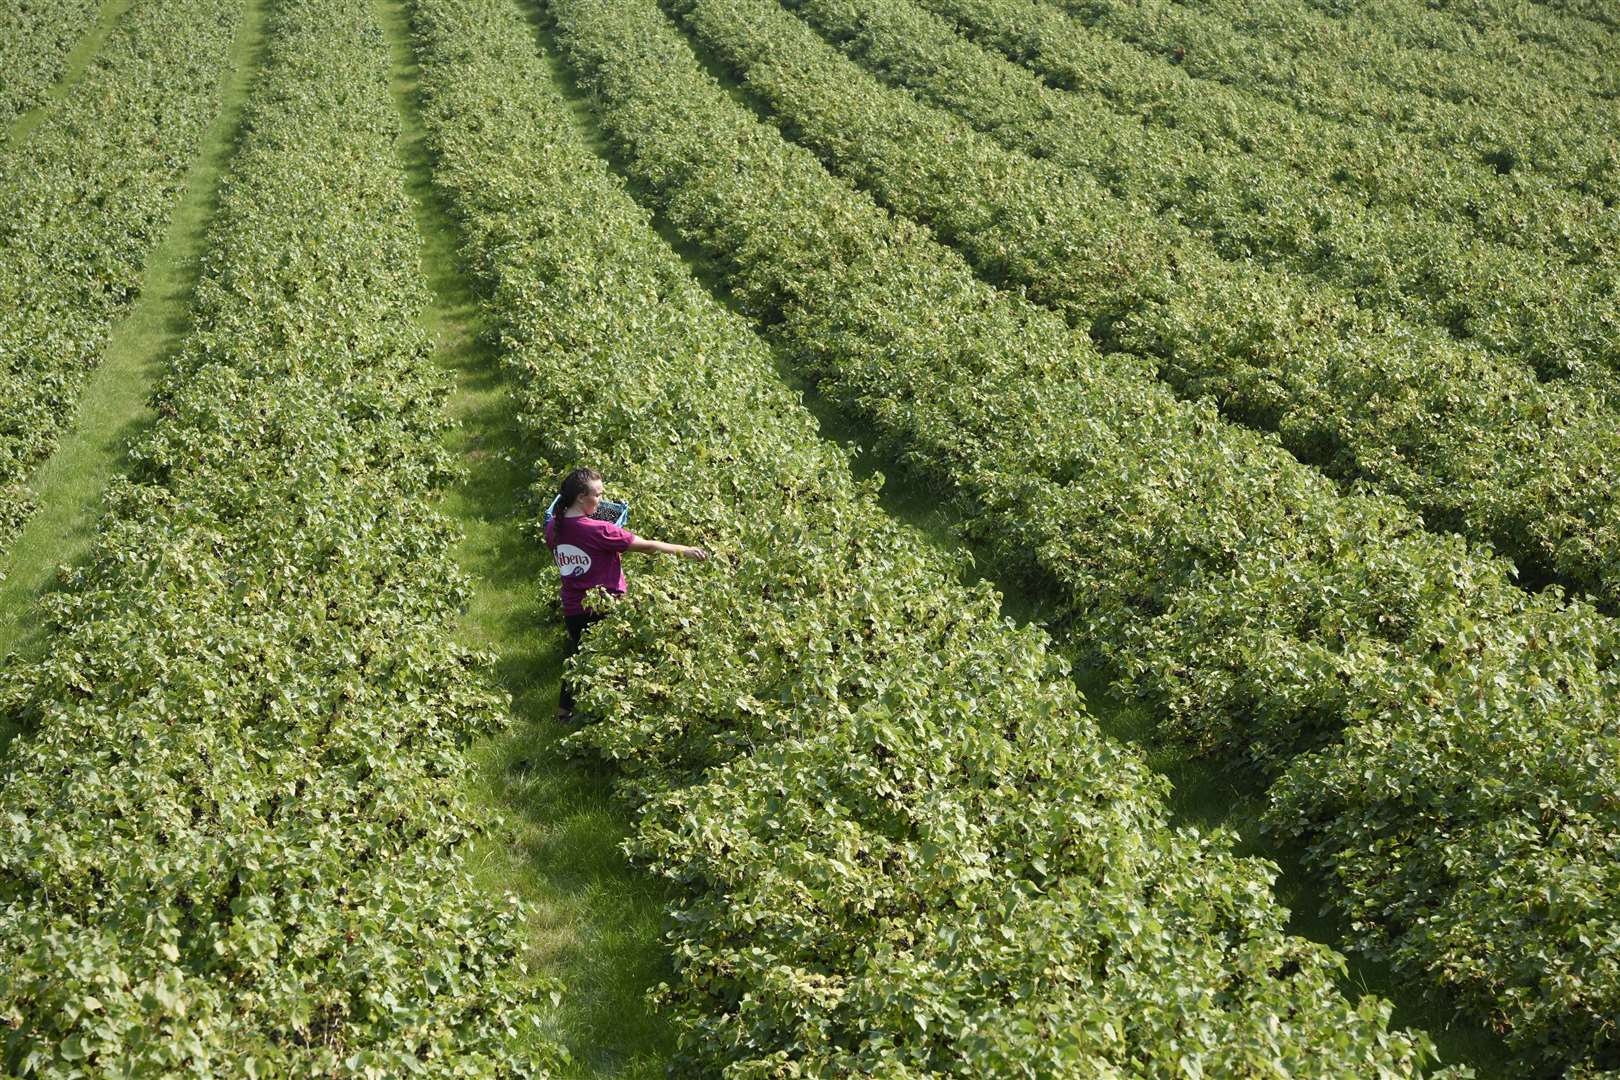 Seasonal labour has presented a challenge to many agricultural firms